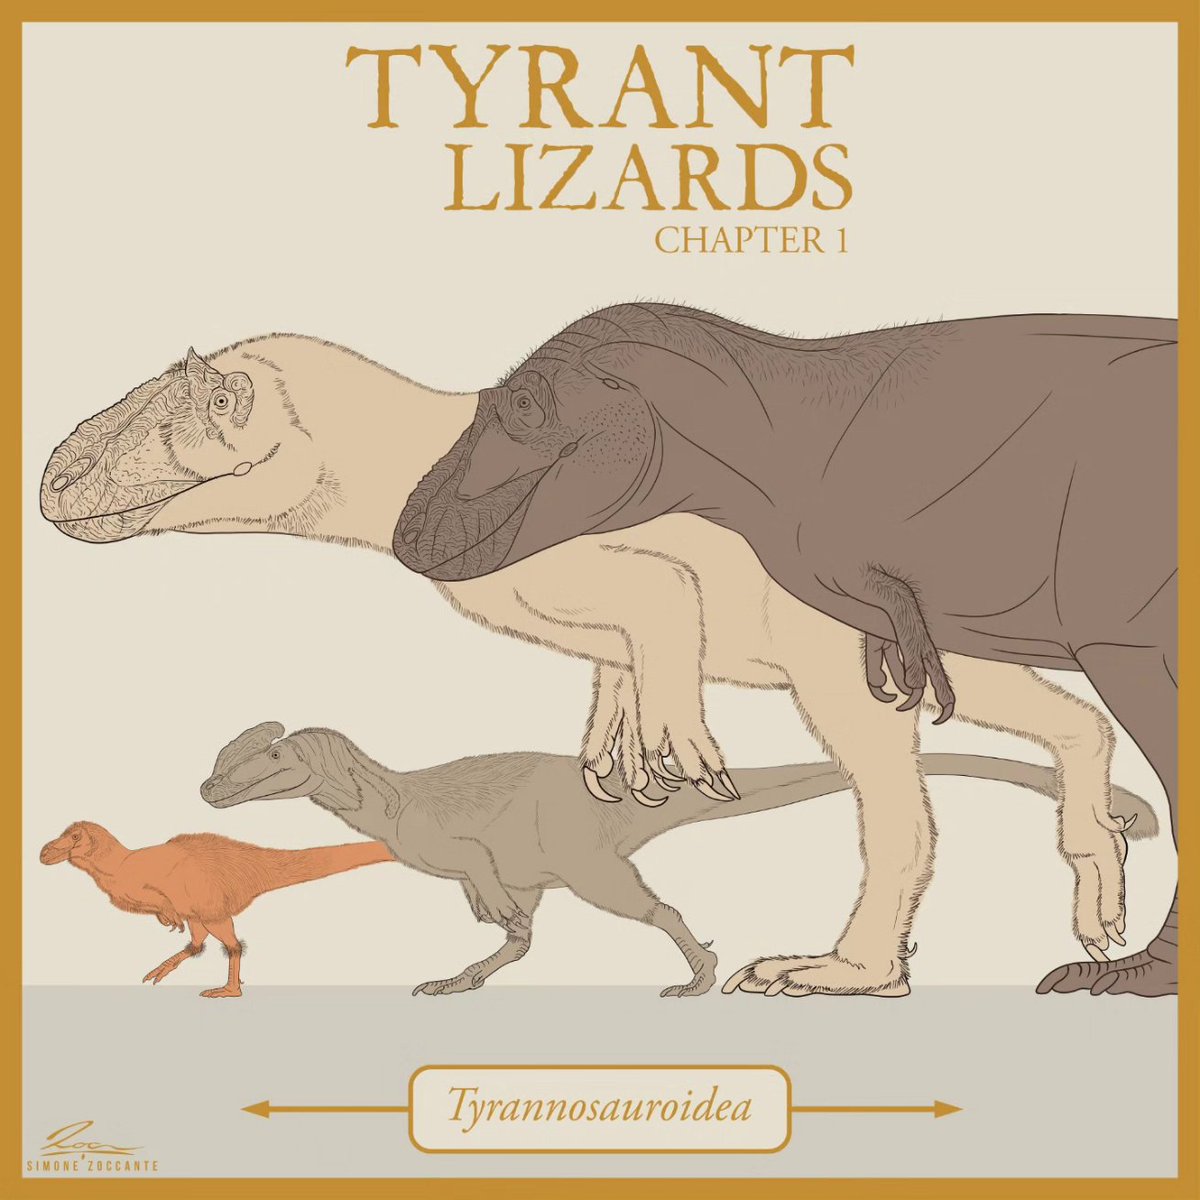 TYRANT LIZARDS chapter 1: Tyrannosauroids.

Here some of the most famous Tyrannosauroids from the most basal to most derived ones.
From left to right:
- Dilong paradoxus
- Guanlong wucaii
- Yutyrannus huali
- Daspletosaurus Wilson
#paleoart #tyrannosauridae #cretaceous